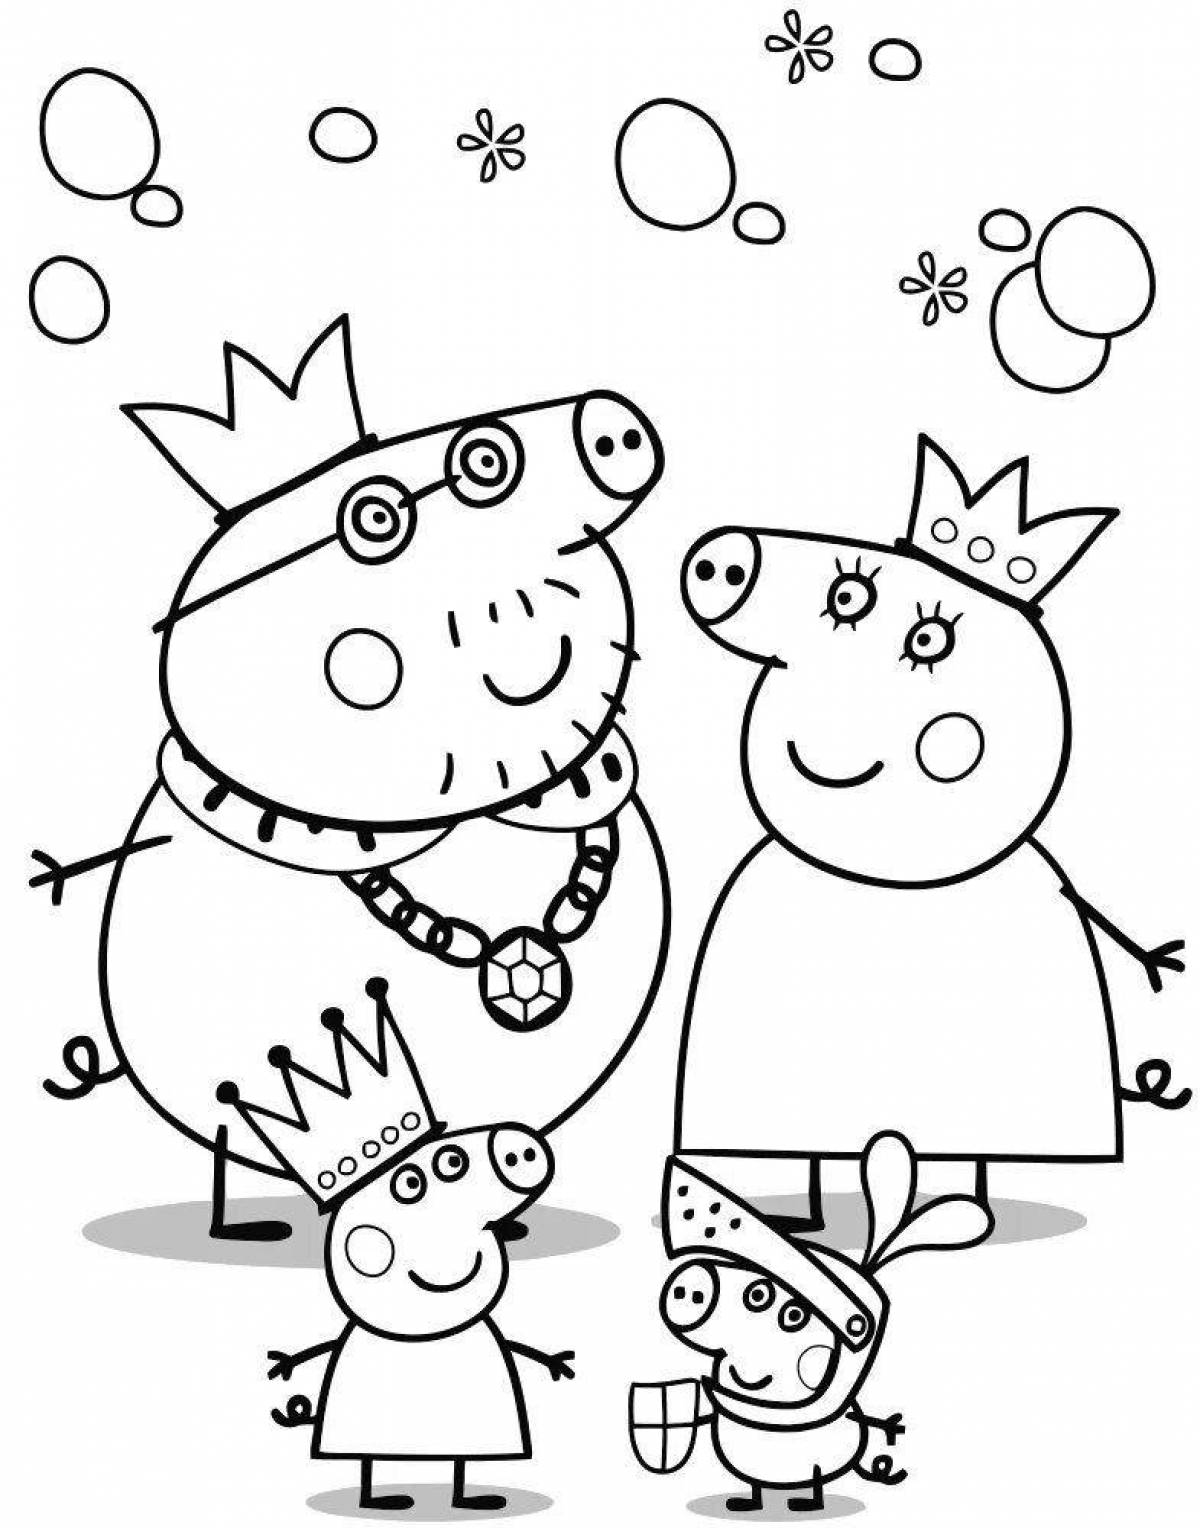 Grinning pig coloring book